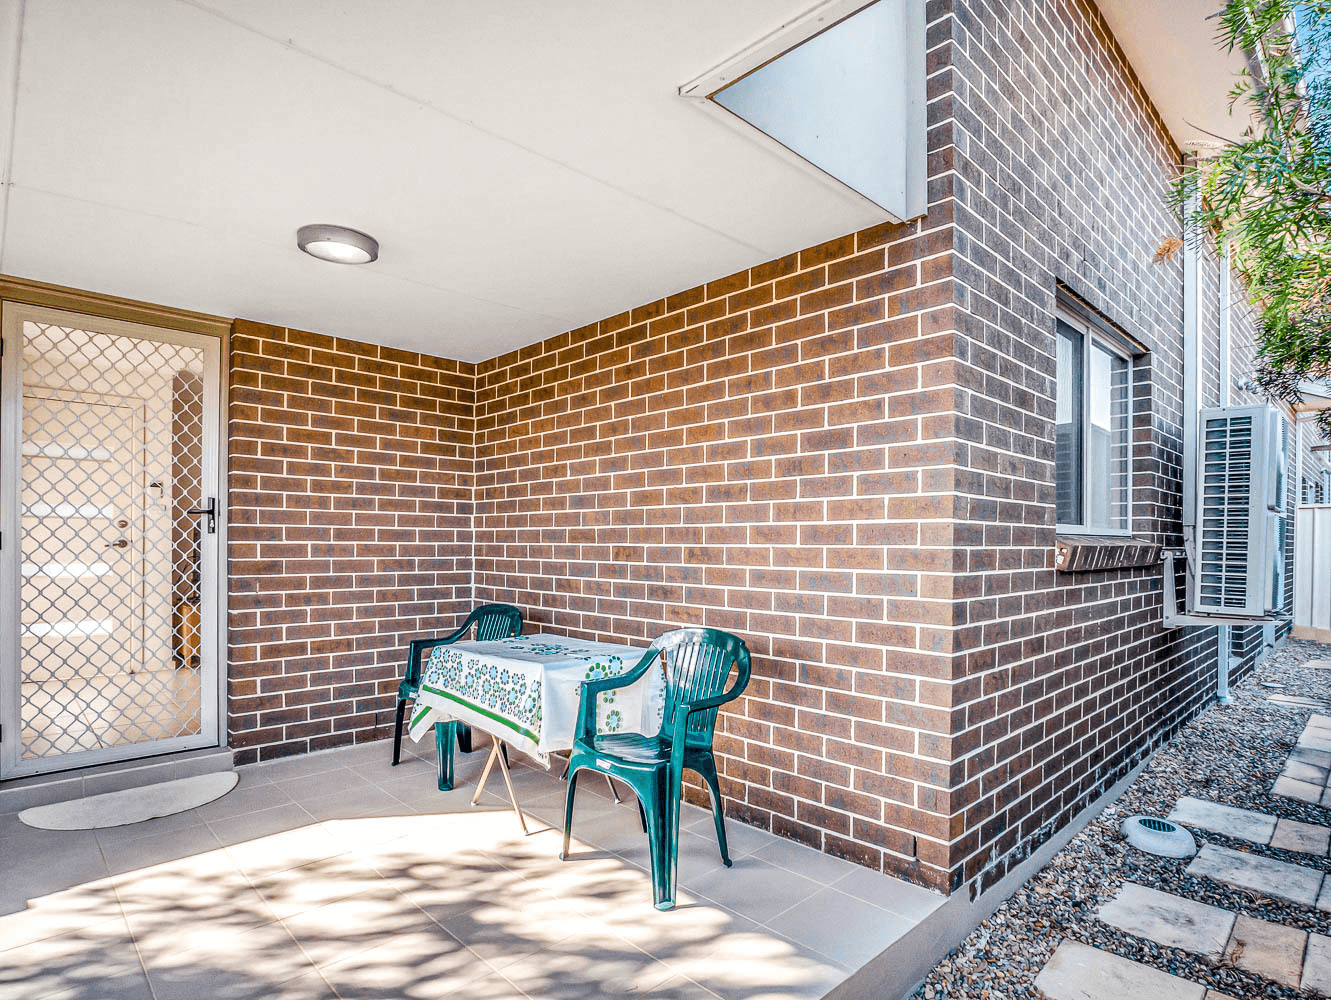 1/48 Canberra Street, Oxley Park, NSW 2760